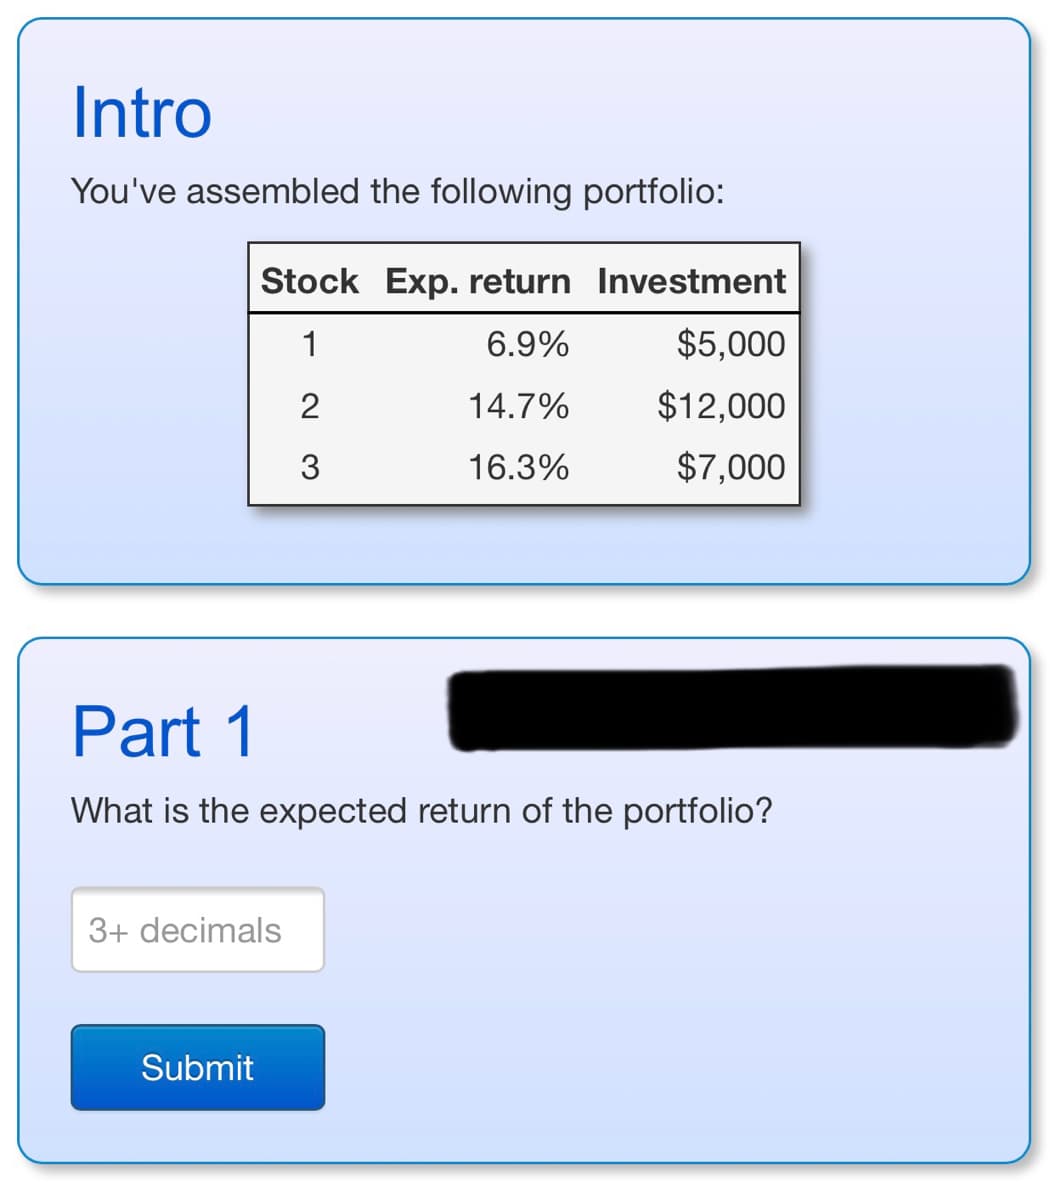 Intro
You've assembled the following portfolio:
Stock Exp. return Investment
1
6.9%
2
14.7%
3
16.3%
Part 1
What is the expected return of the portfolio?
3+ decimals
Submit
$5,000
$12,000
$7,000